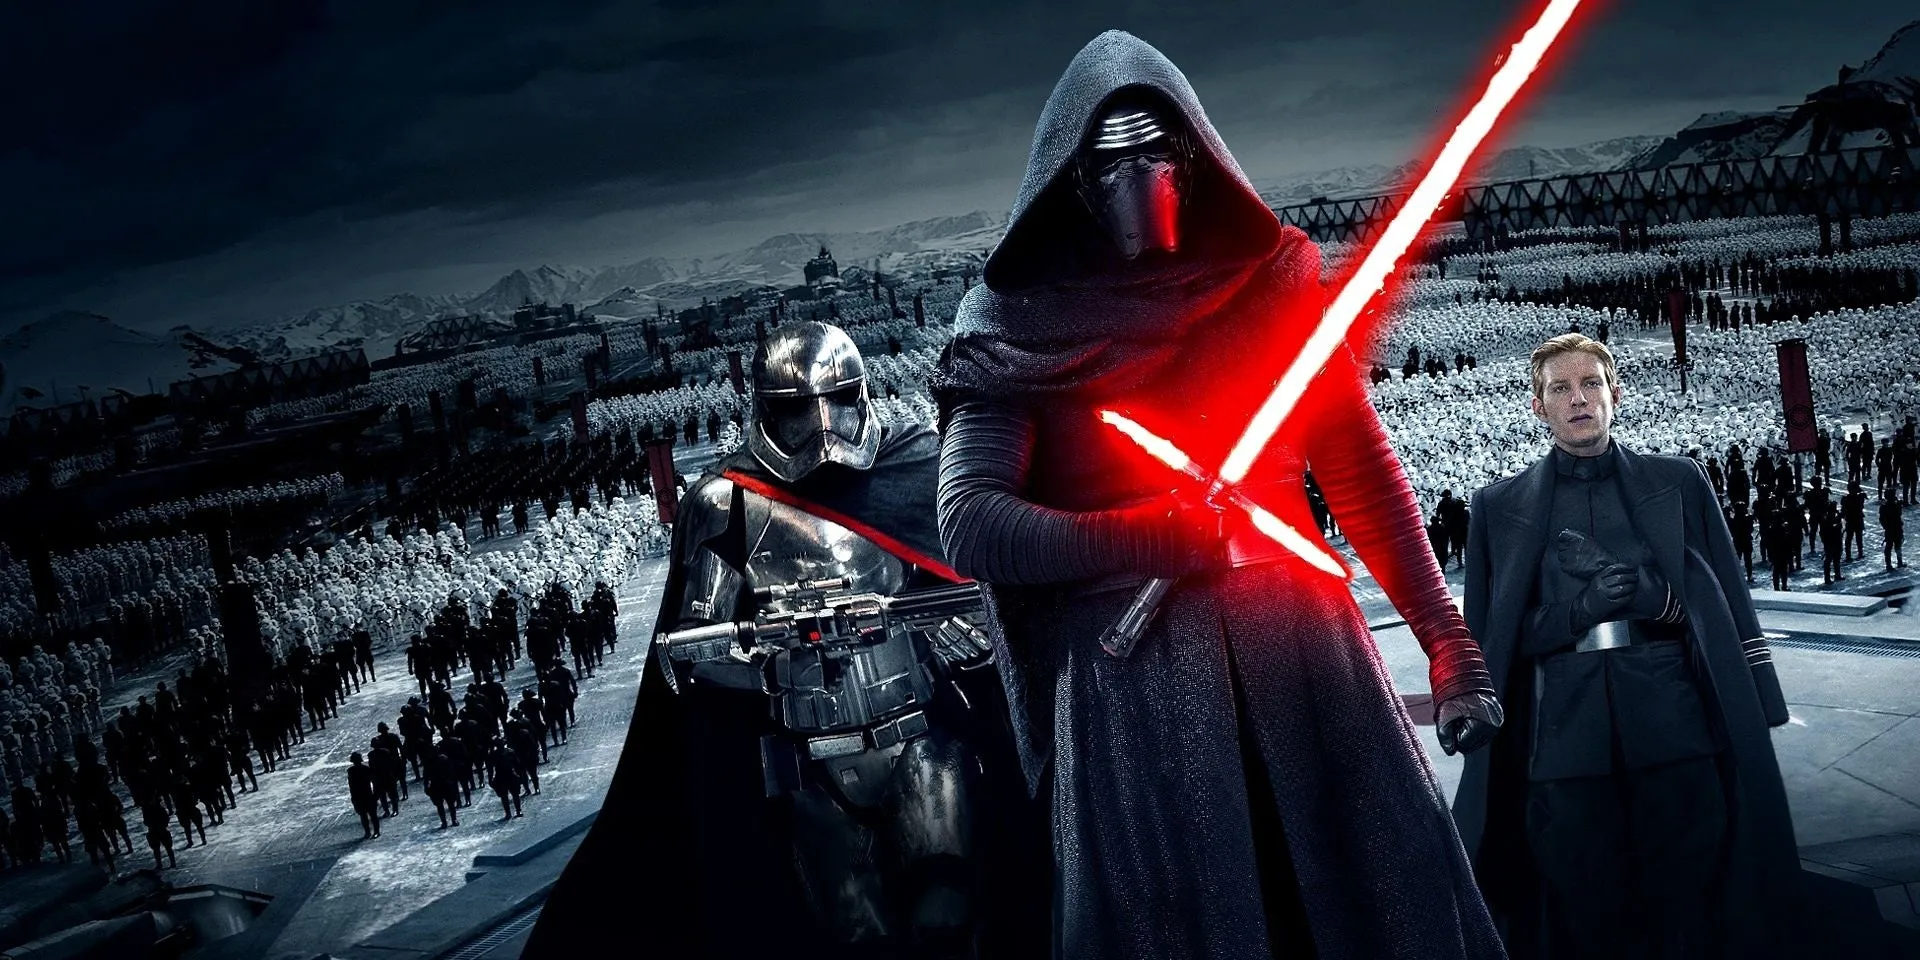 The First Order in Star Wars: The Force Awakens